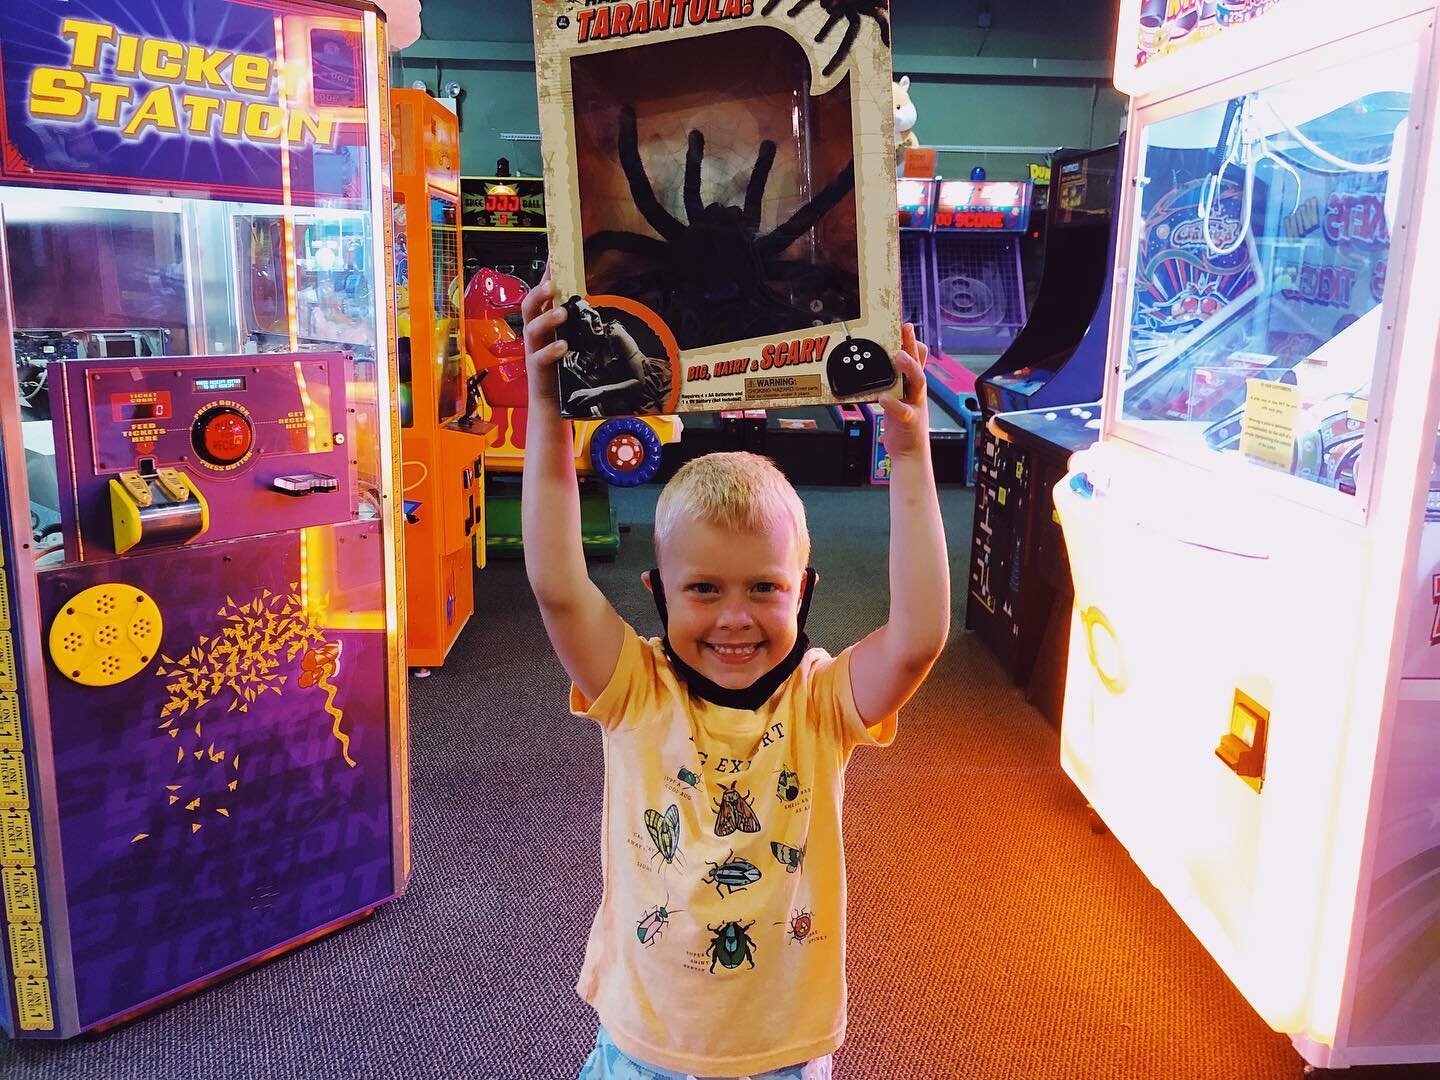 Saving up your tickets pays off !😄🕷 #fun #prizes #arcade